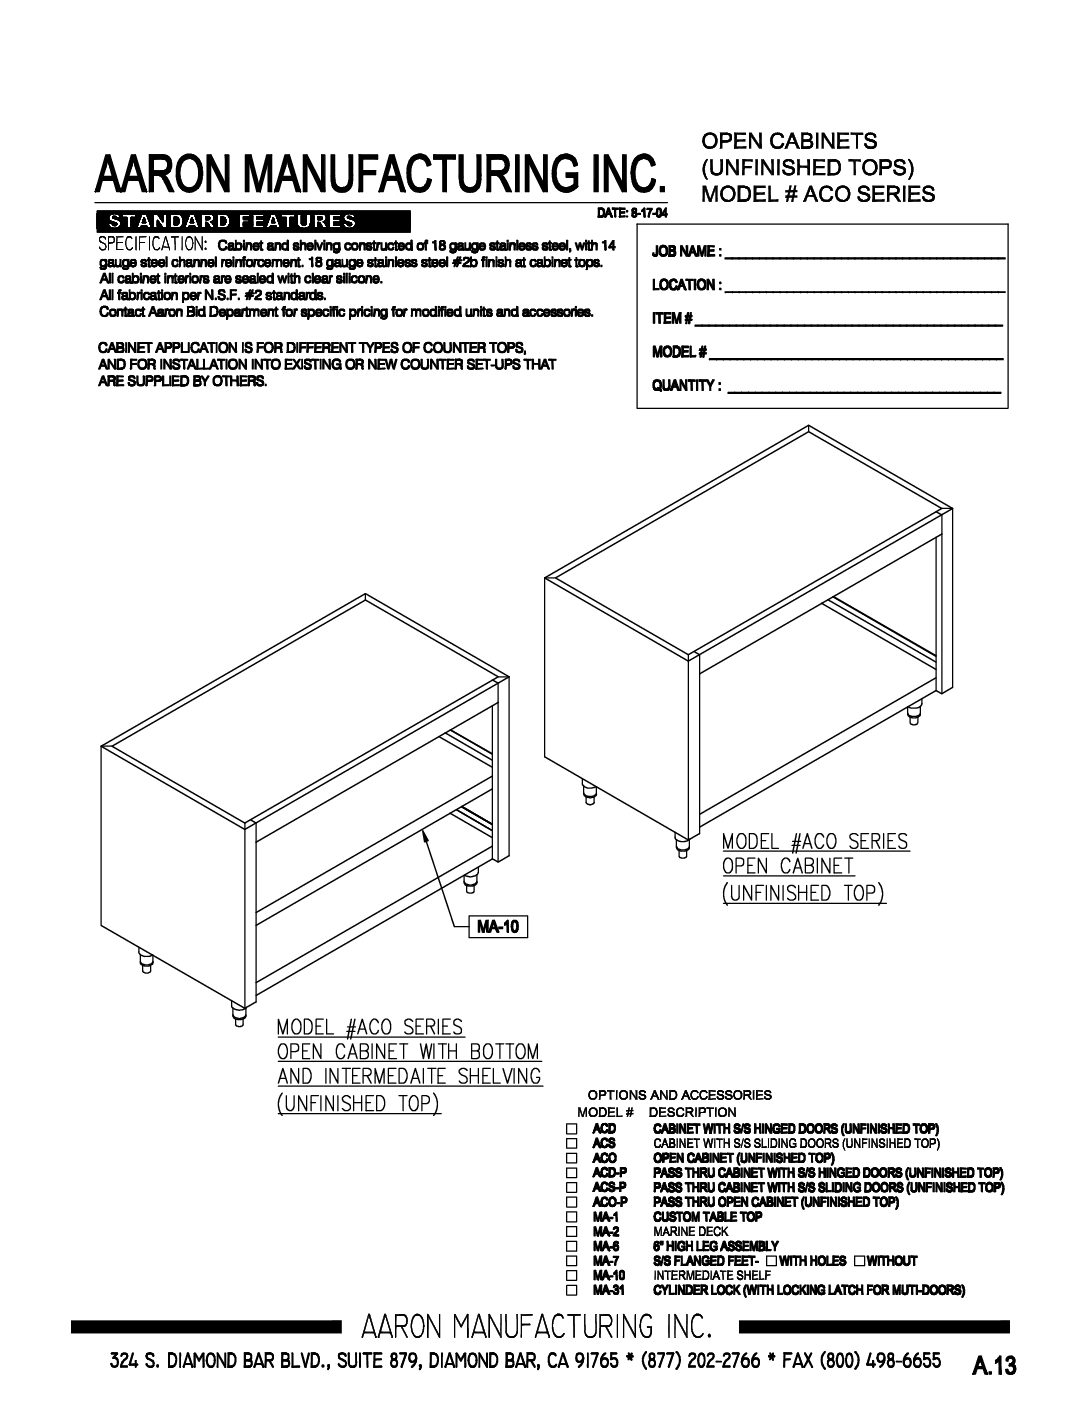 Open Cabinets (Unfinished Tops) ACO Series